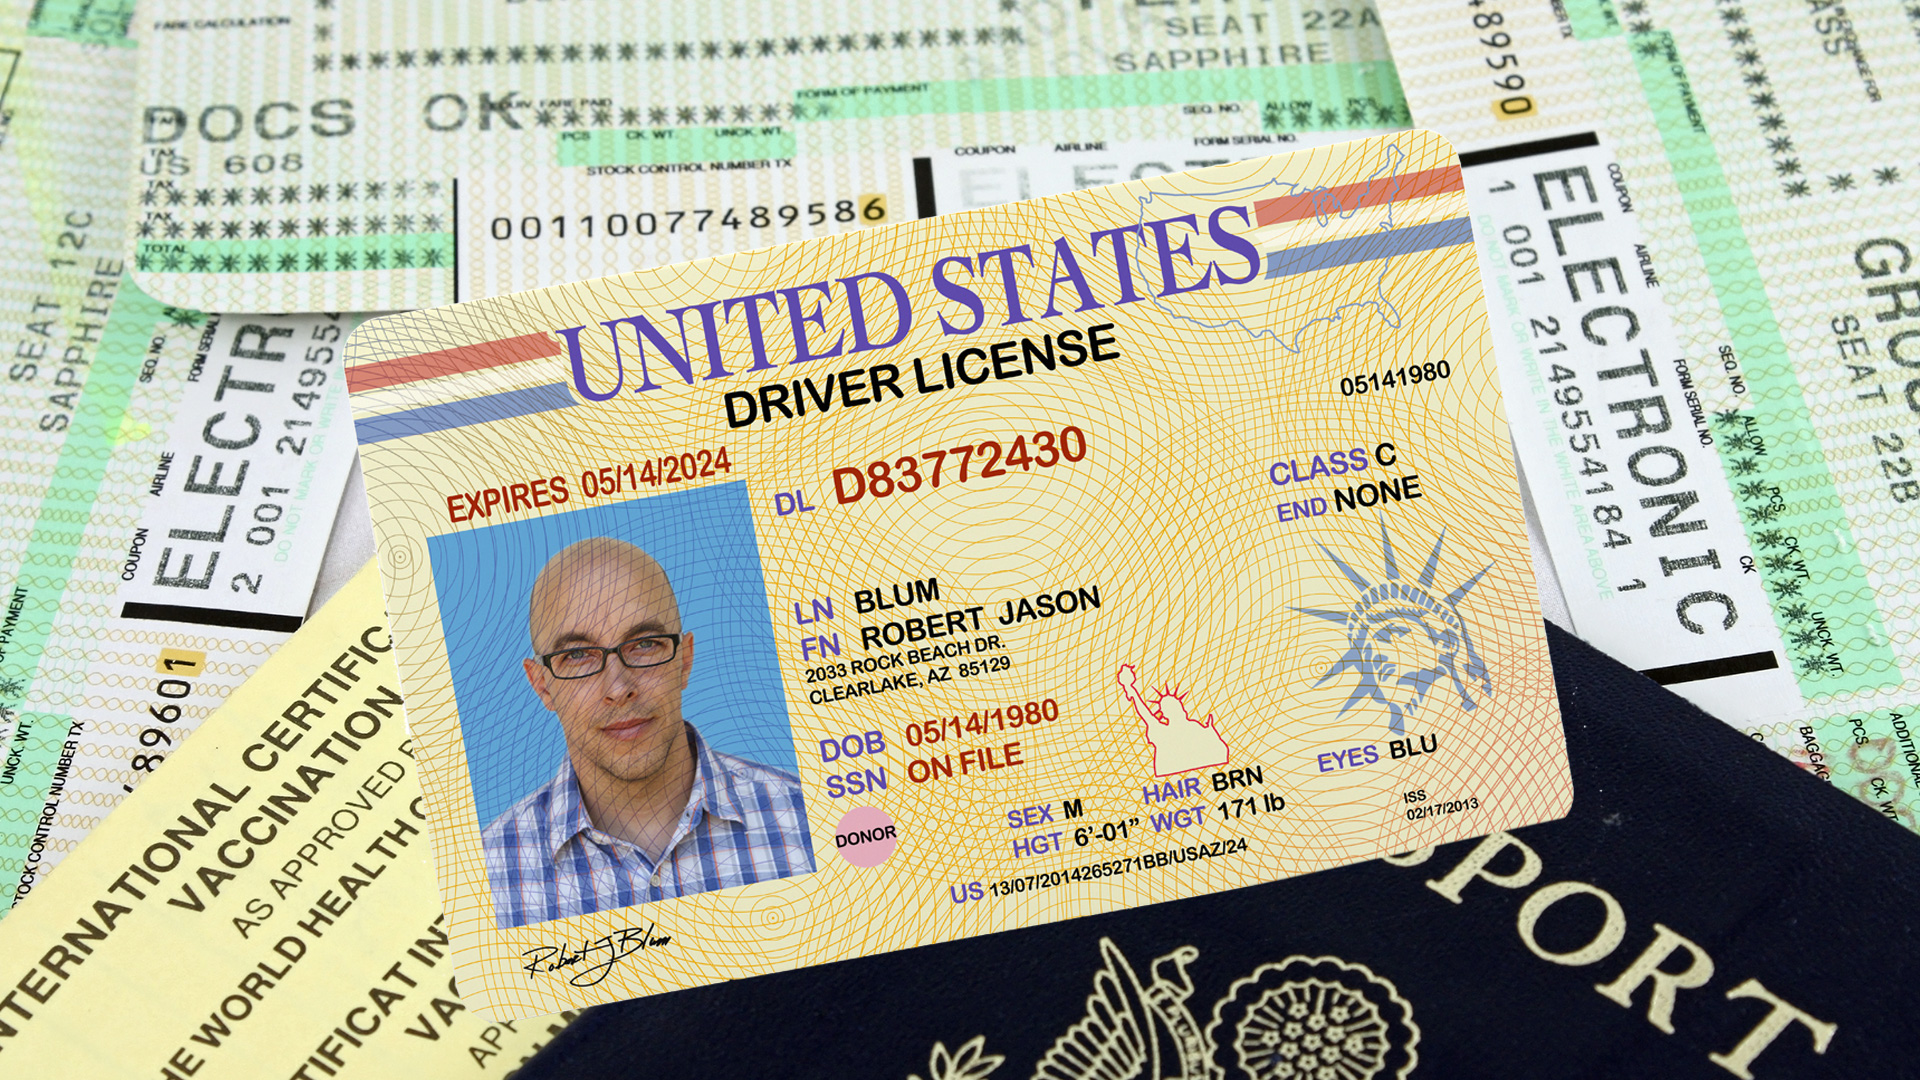 new york enhanced drivers license to fly